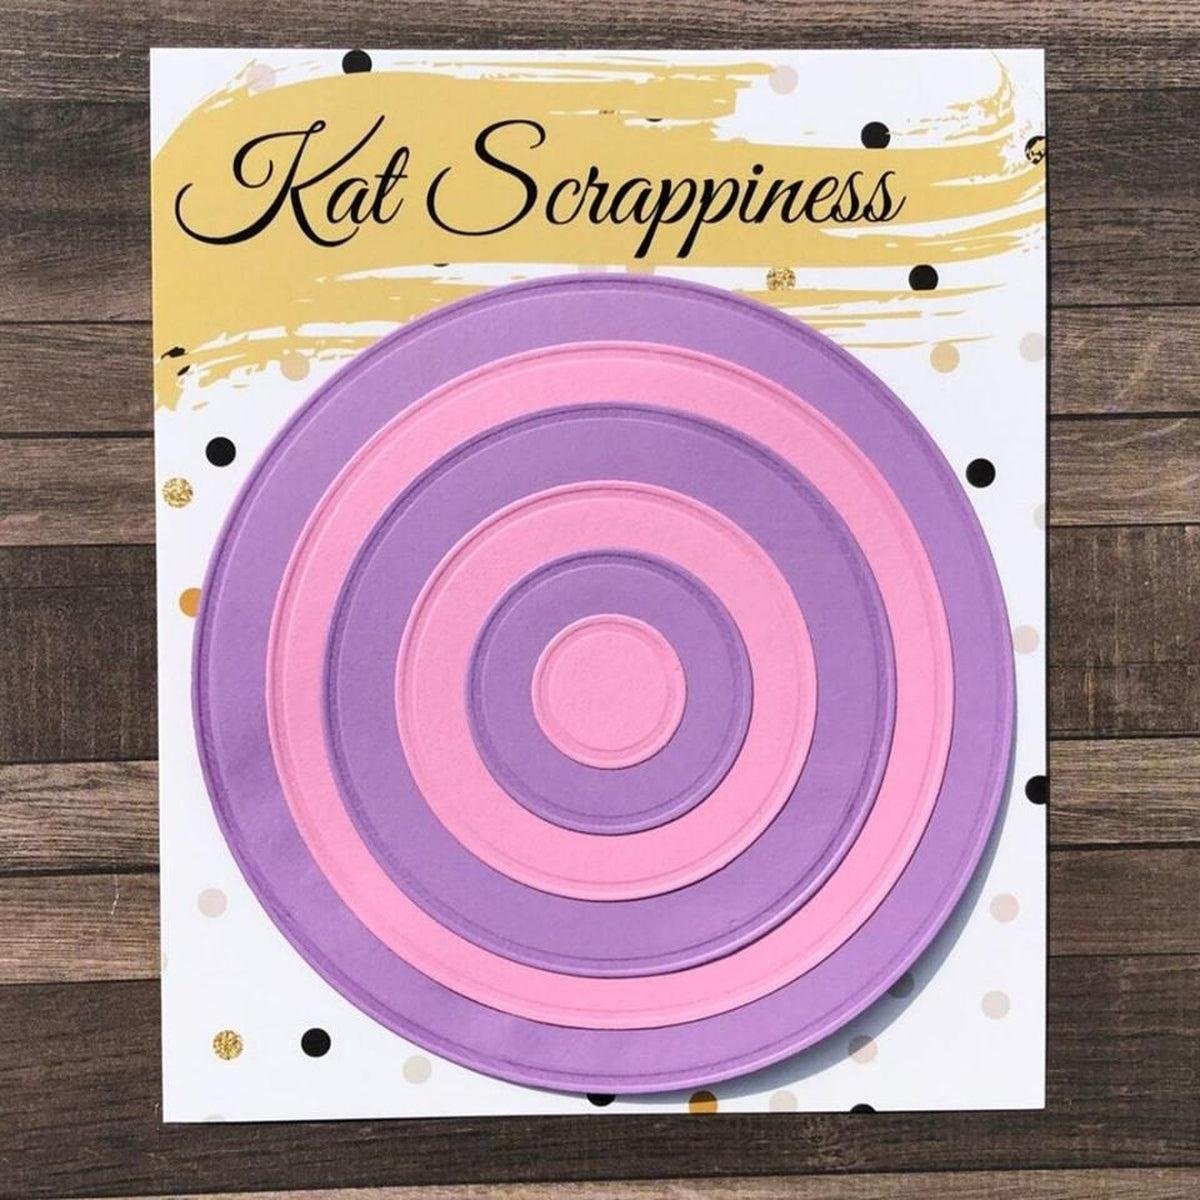 Kat Scrappiness Telescopic Embossing Powder Tool with Retractable Brush